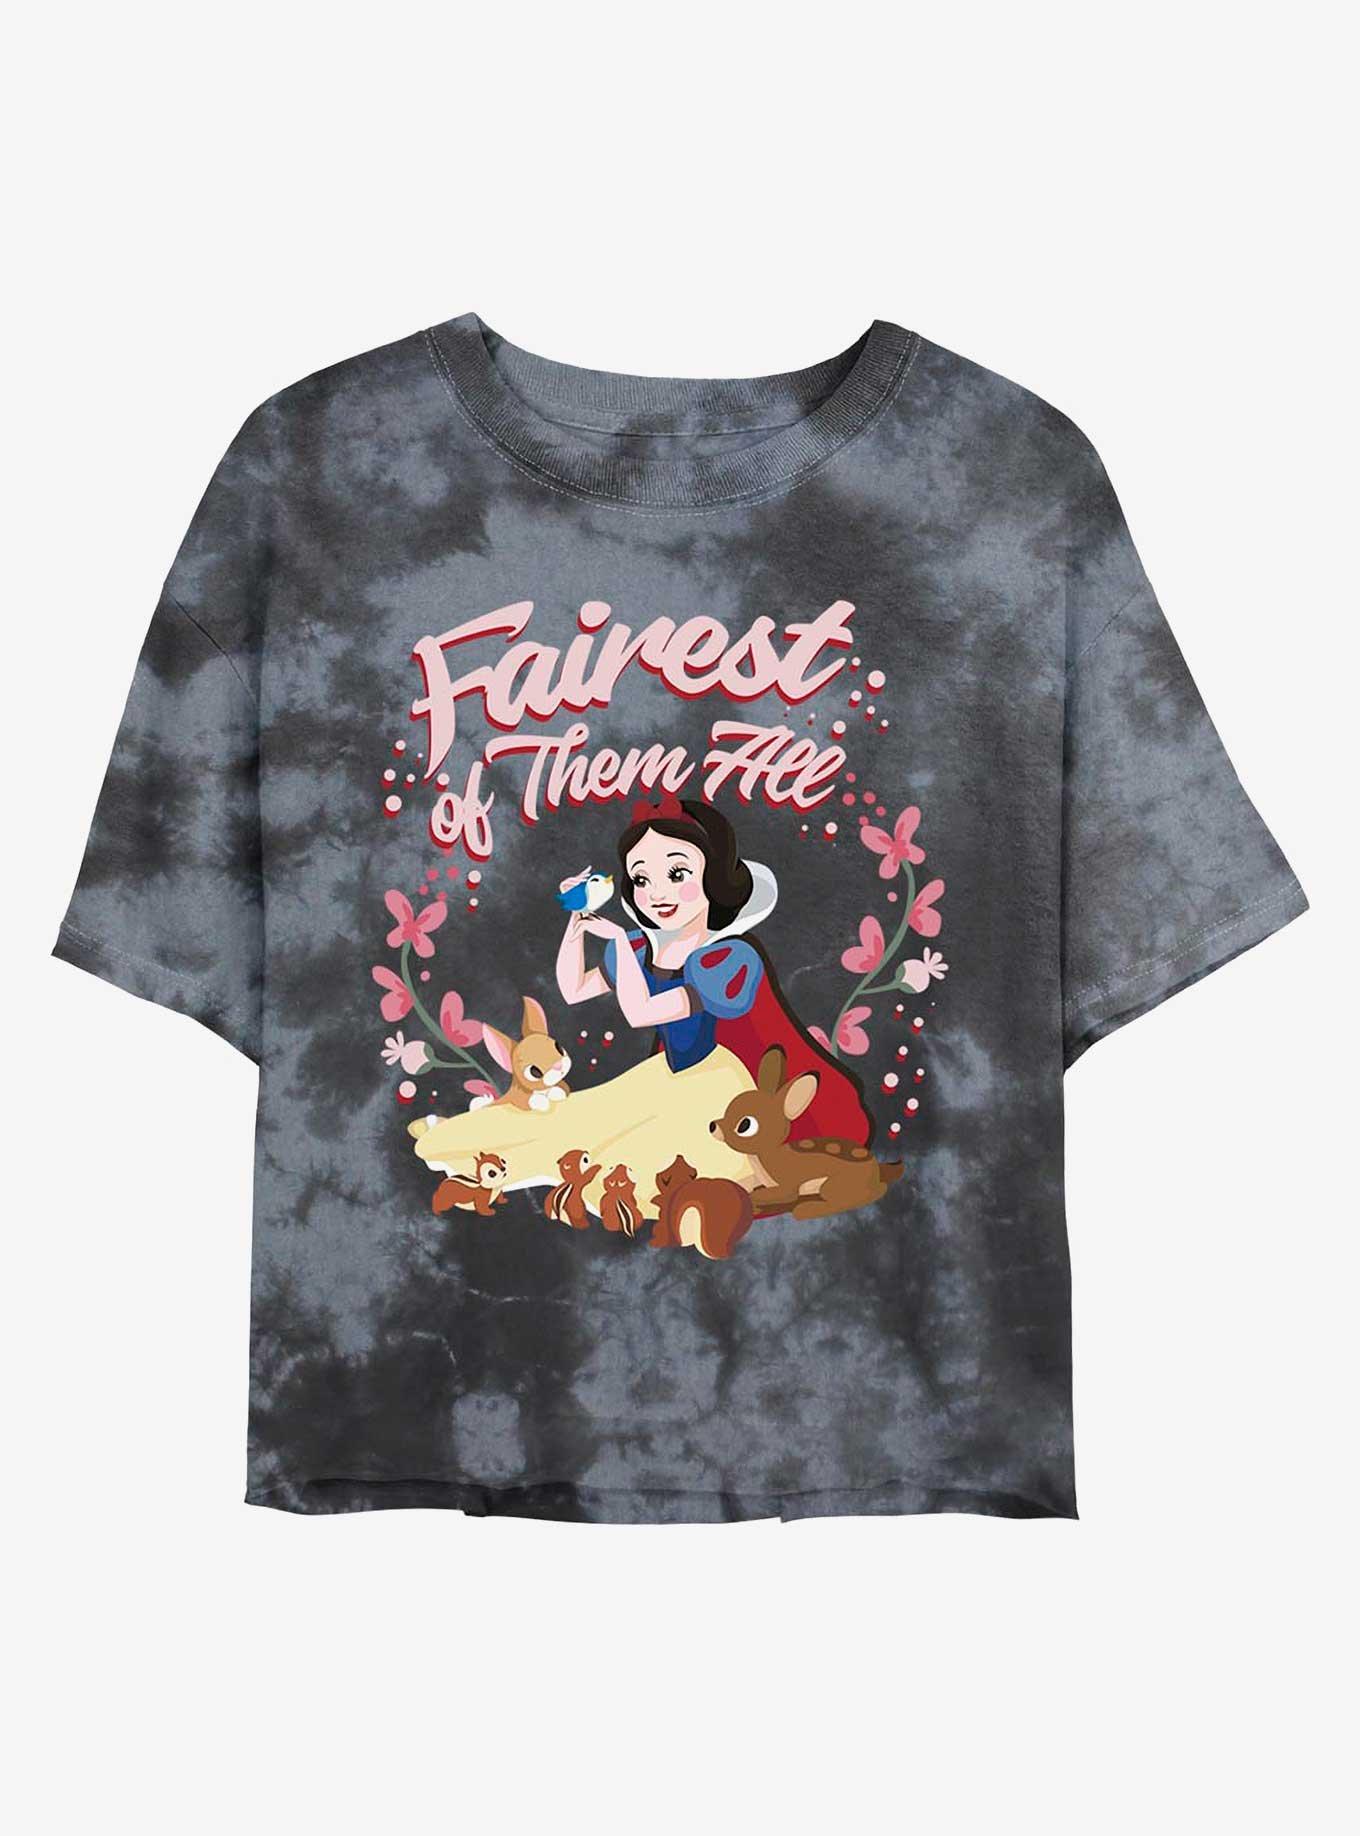 Disney Snow White and the Seven Dwarfs The Fairest Of Them All Tie-Dye Girls Crop T-Shirt, , hi-res